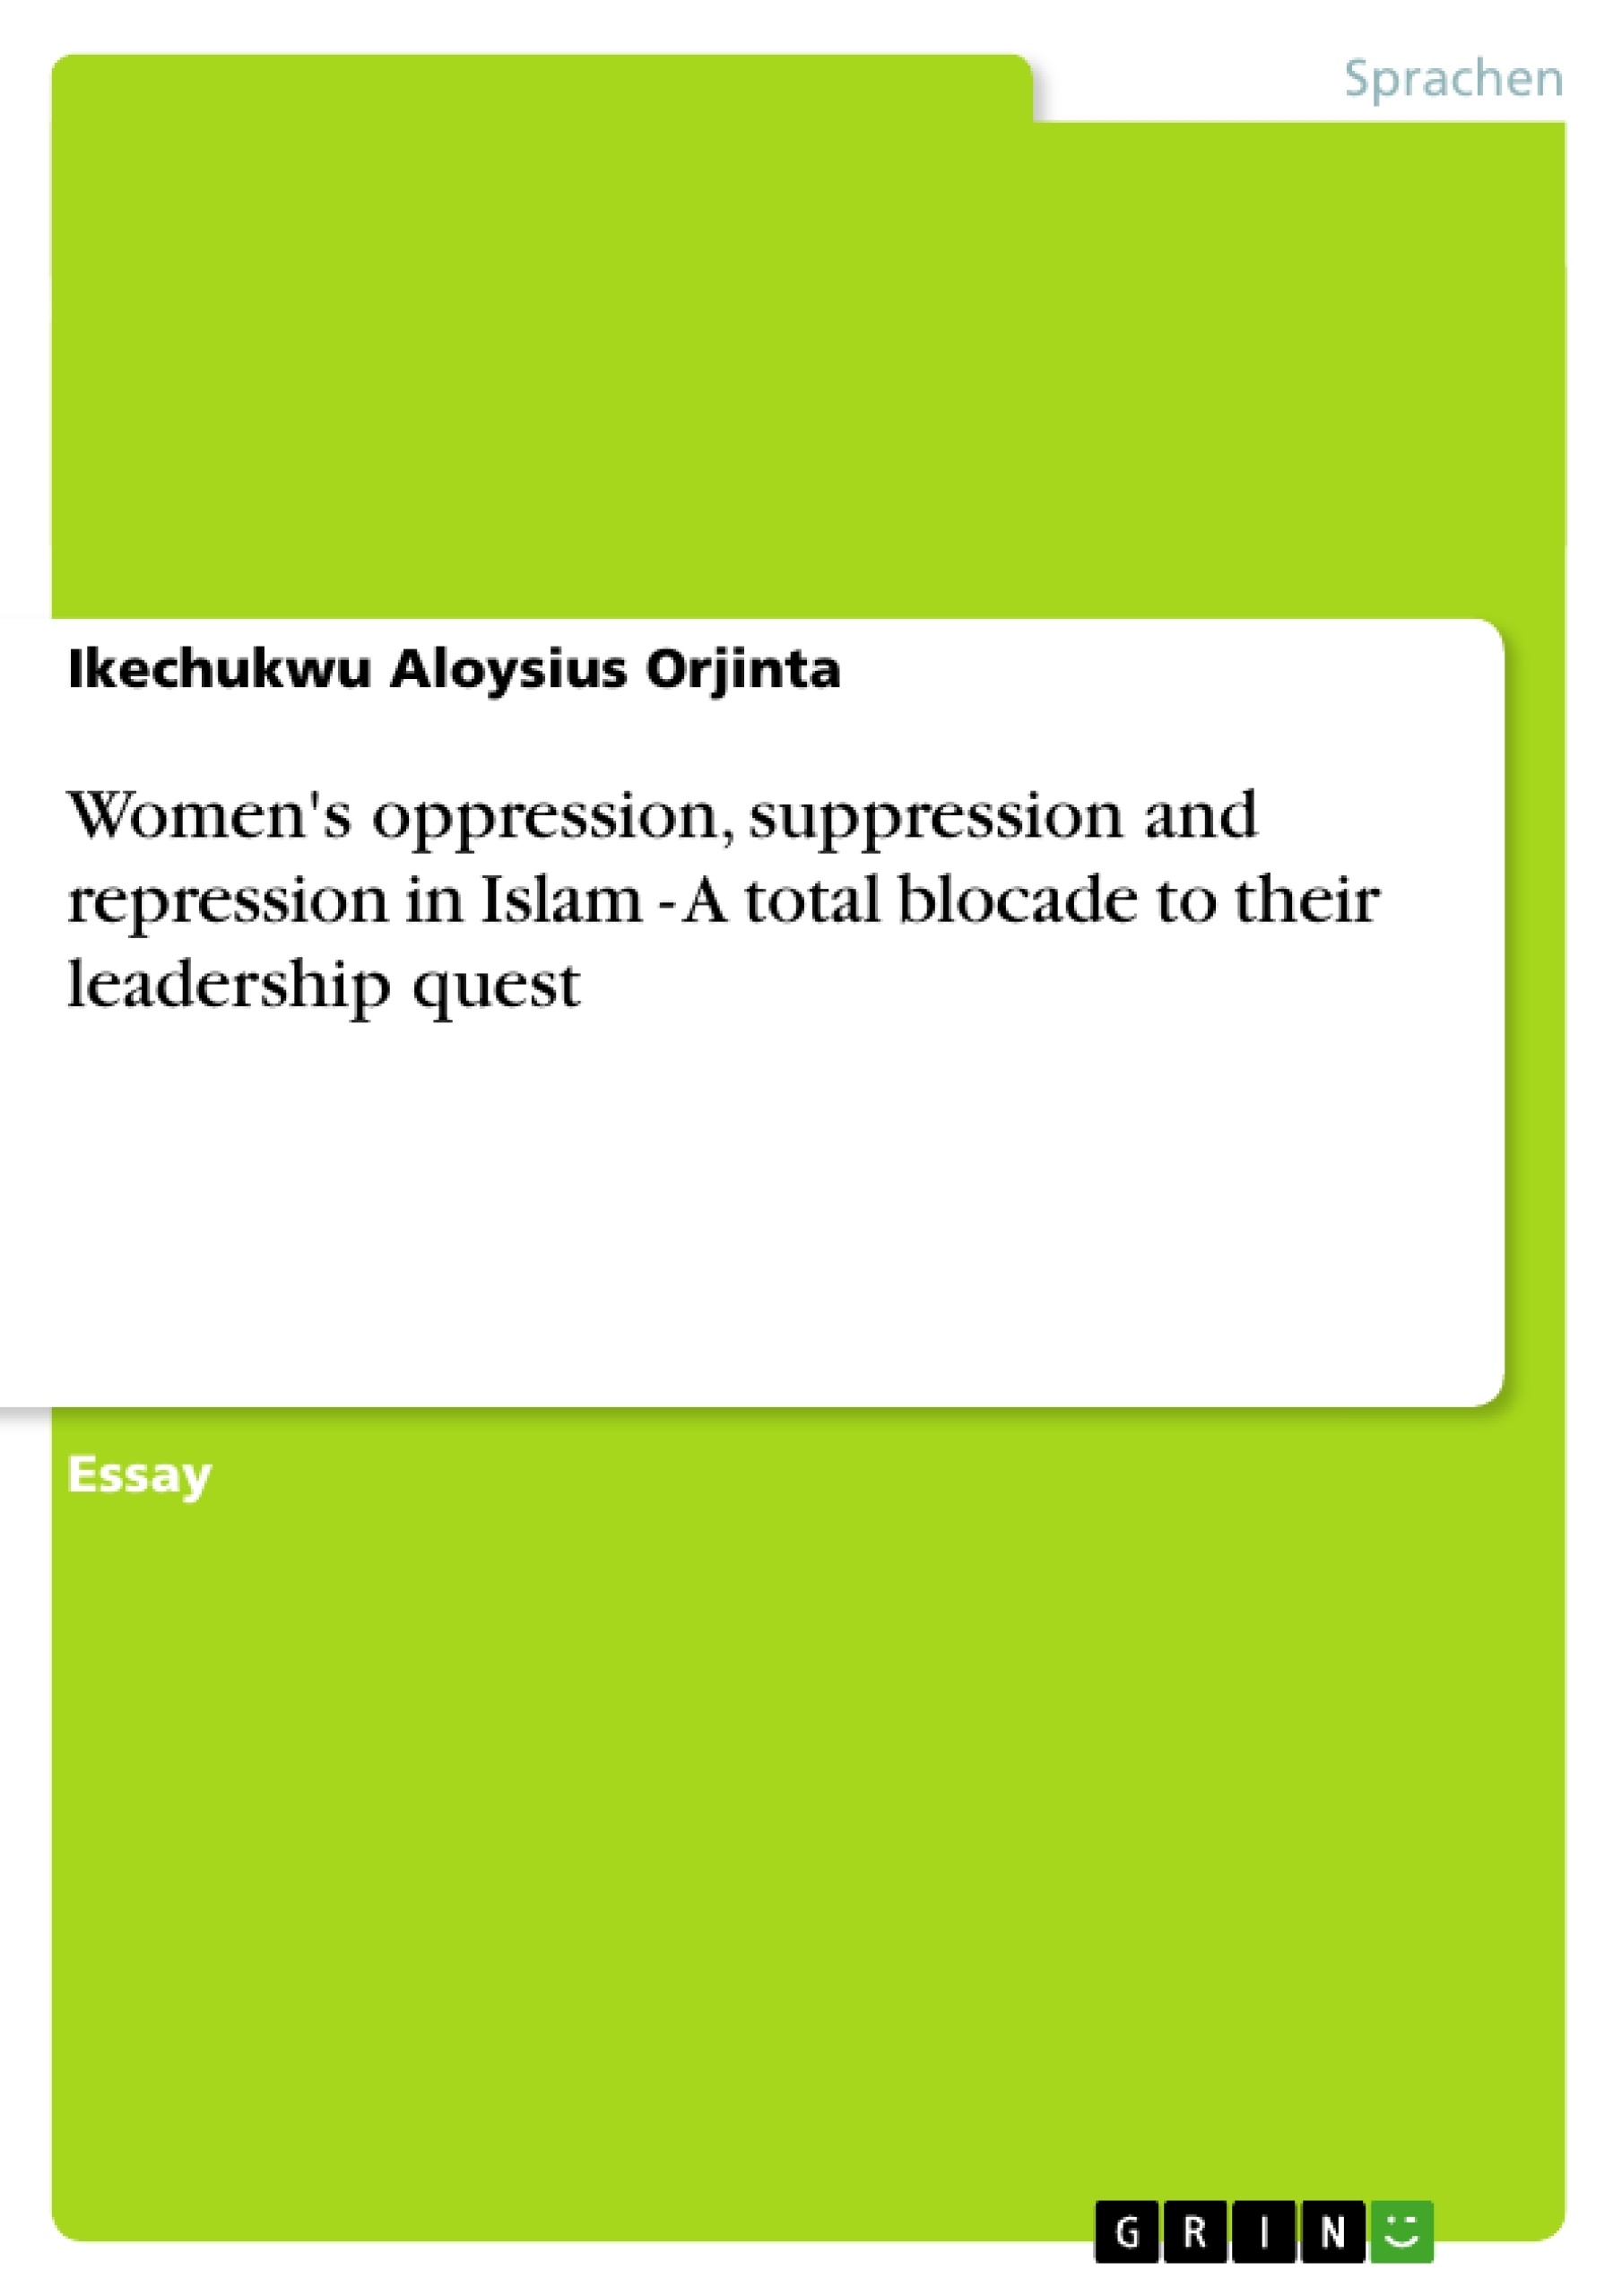 Titel: Women's oppression, suppression and repression in Islam - A total blocade to their leadership quest